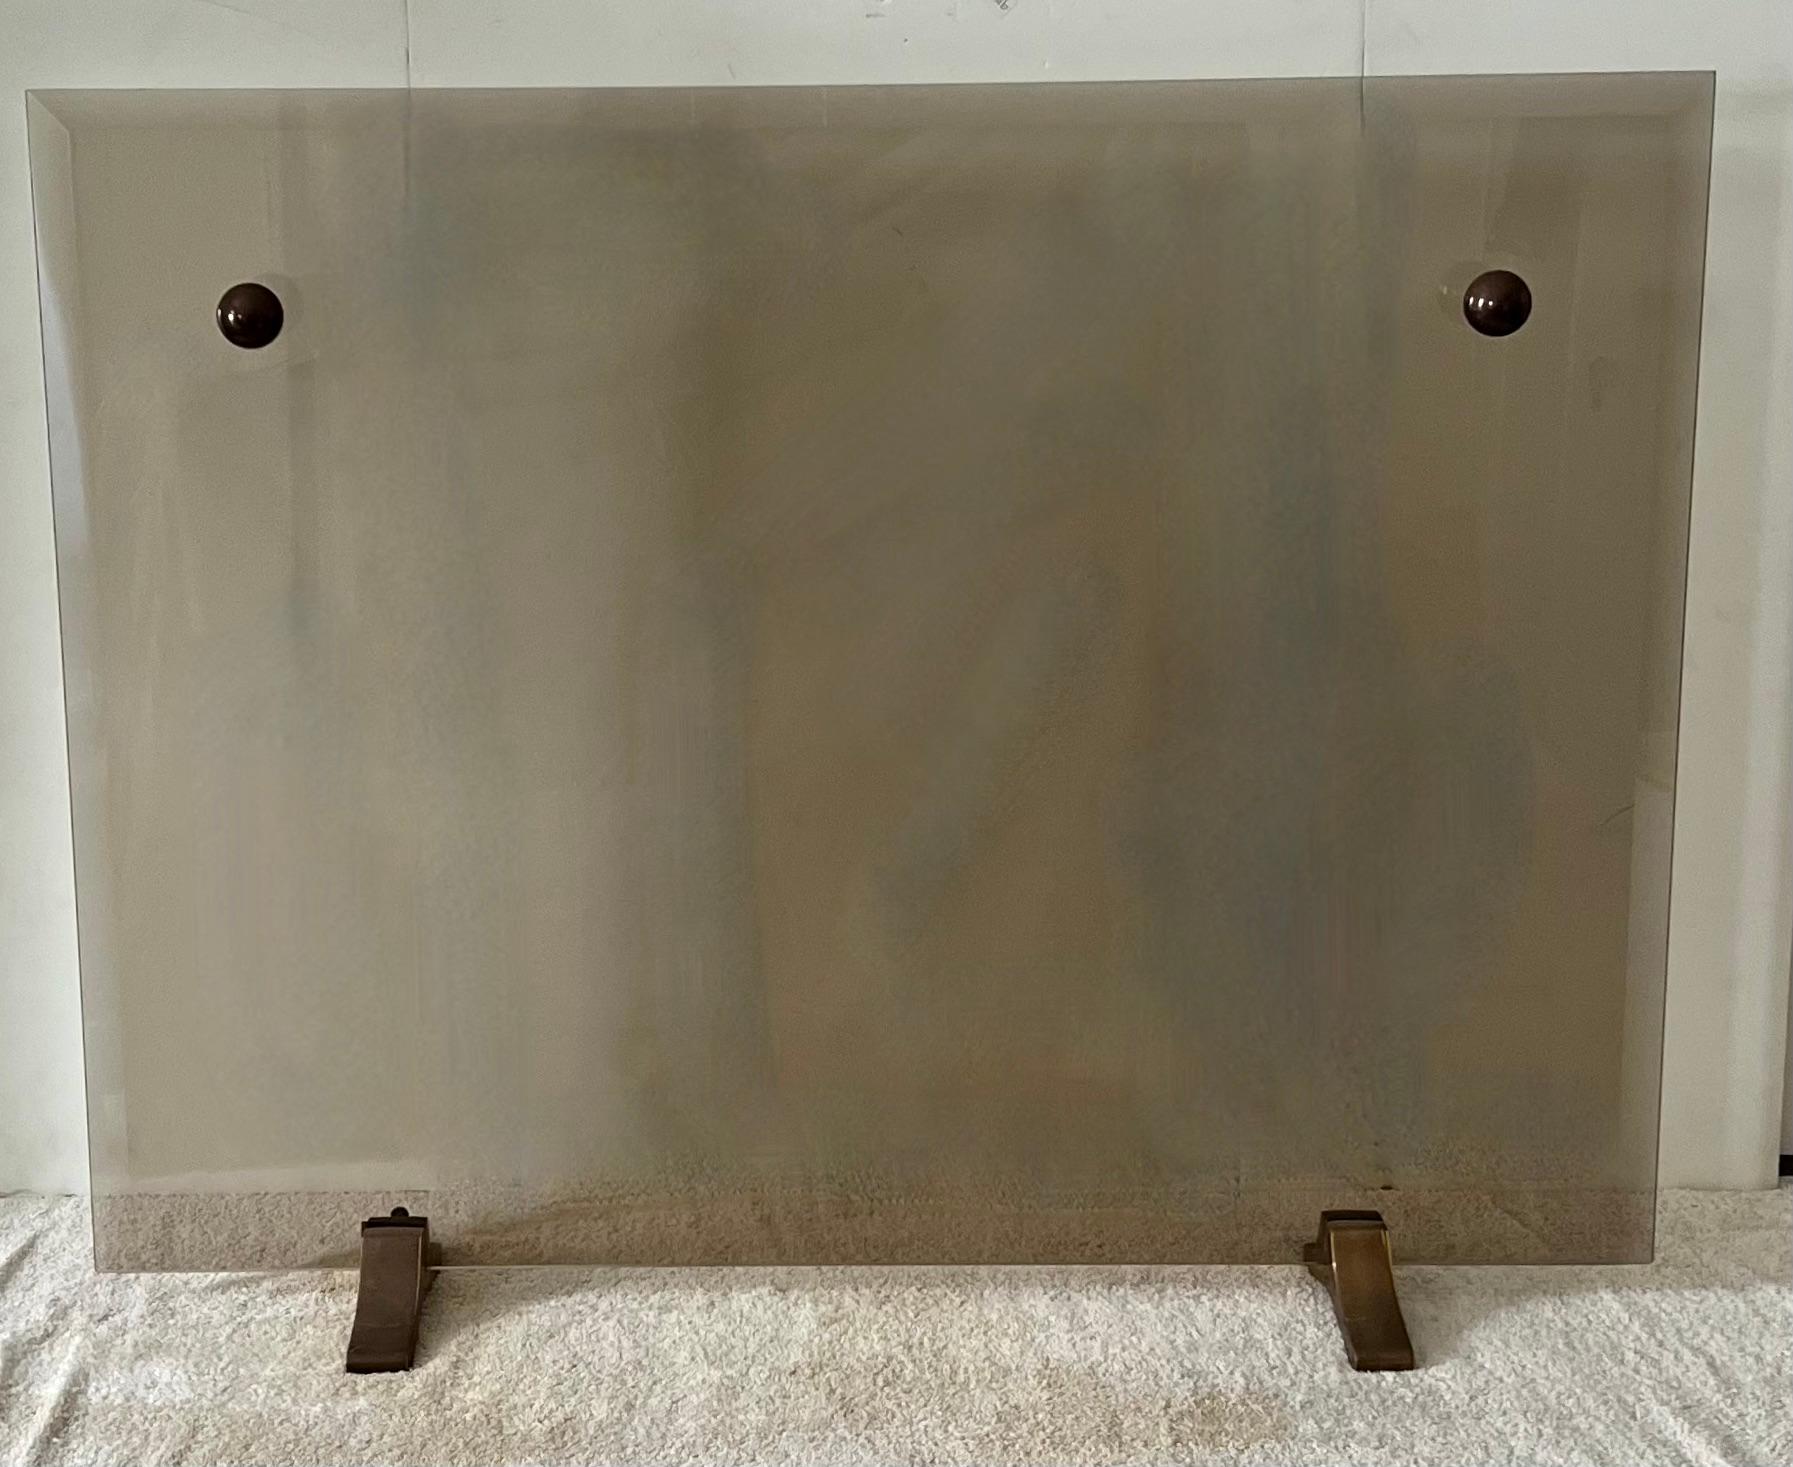 A smoked glass fireplace screen. The glass is beveled and is on panel supported by two bronze feet. the glass has two spherical knobs, which make moving the piece much easier than trying to pick up the entire piece of glass.

The simplicity is quite